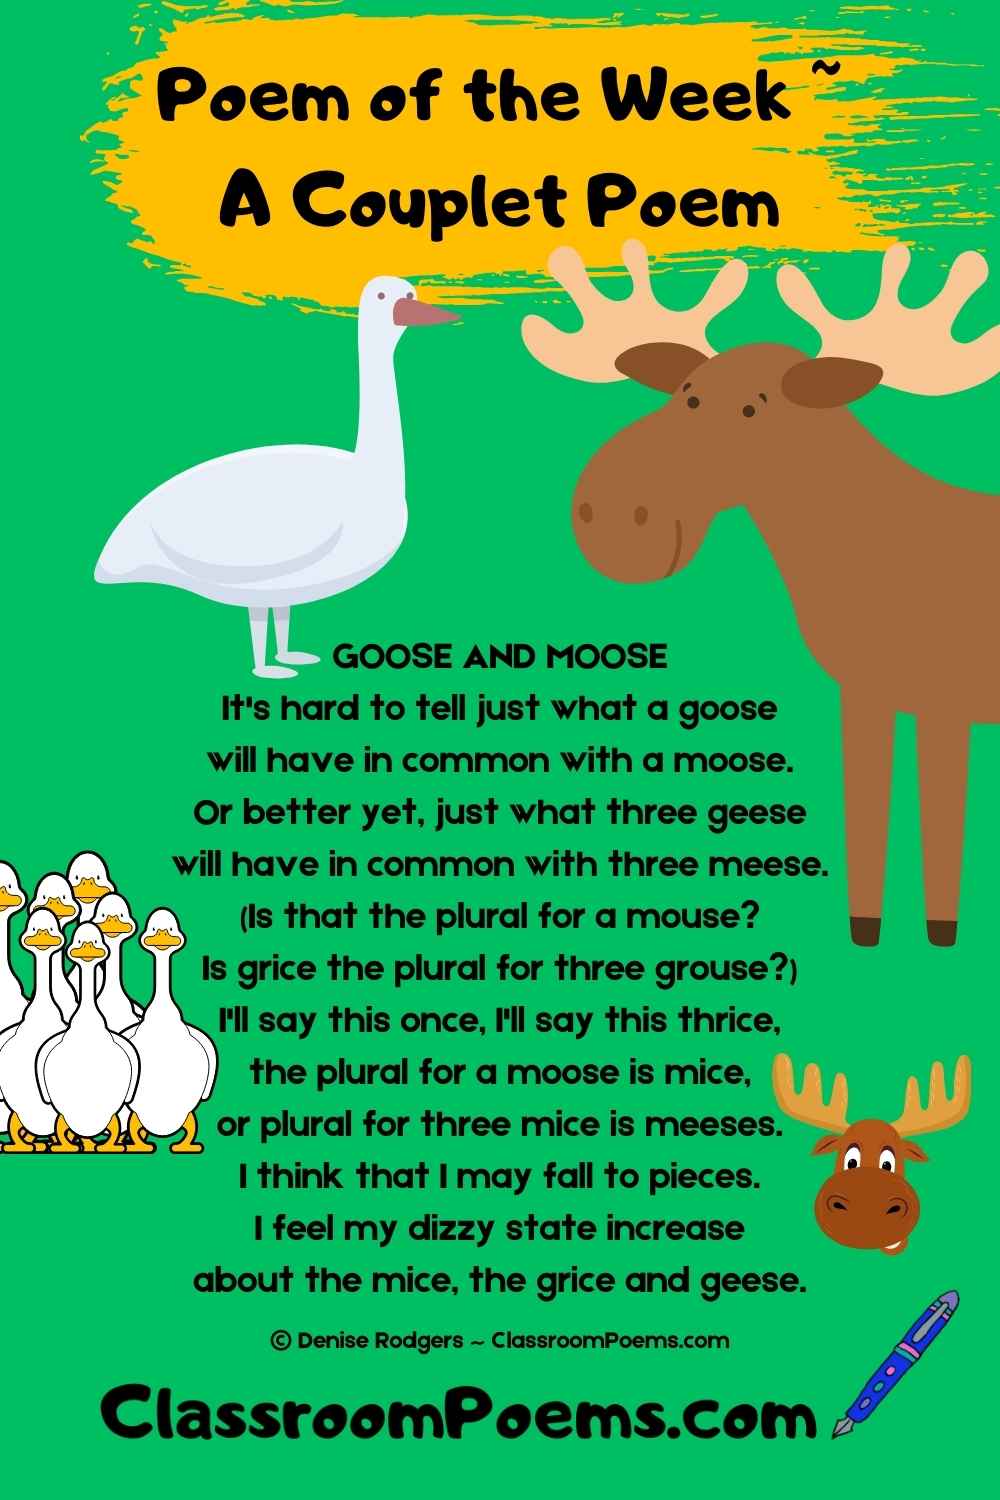 GOOSE AND MOOSE, a couplet poem by Denise Rodgers on ClassroomPoems.com.